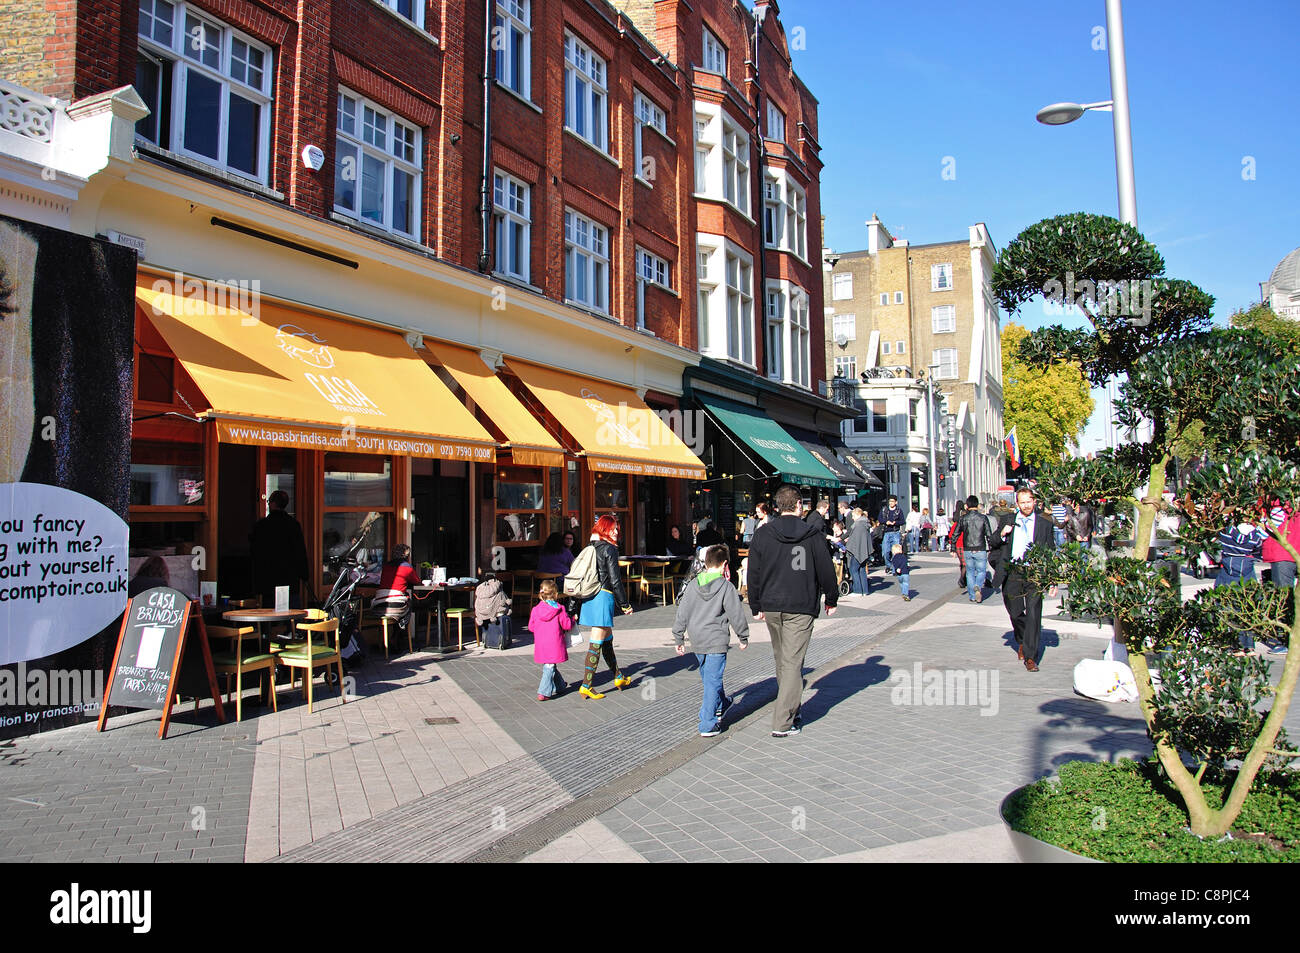 Outdoor cafes on Exhibition Road, Kensington, Royal Borough of Kensington and Chelsea, Greater London, England, United Kingdom Stock Photo